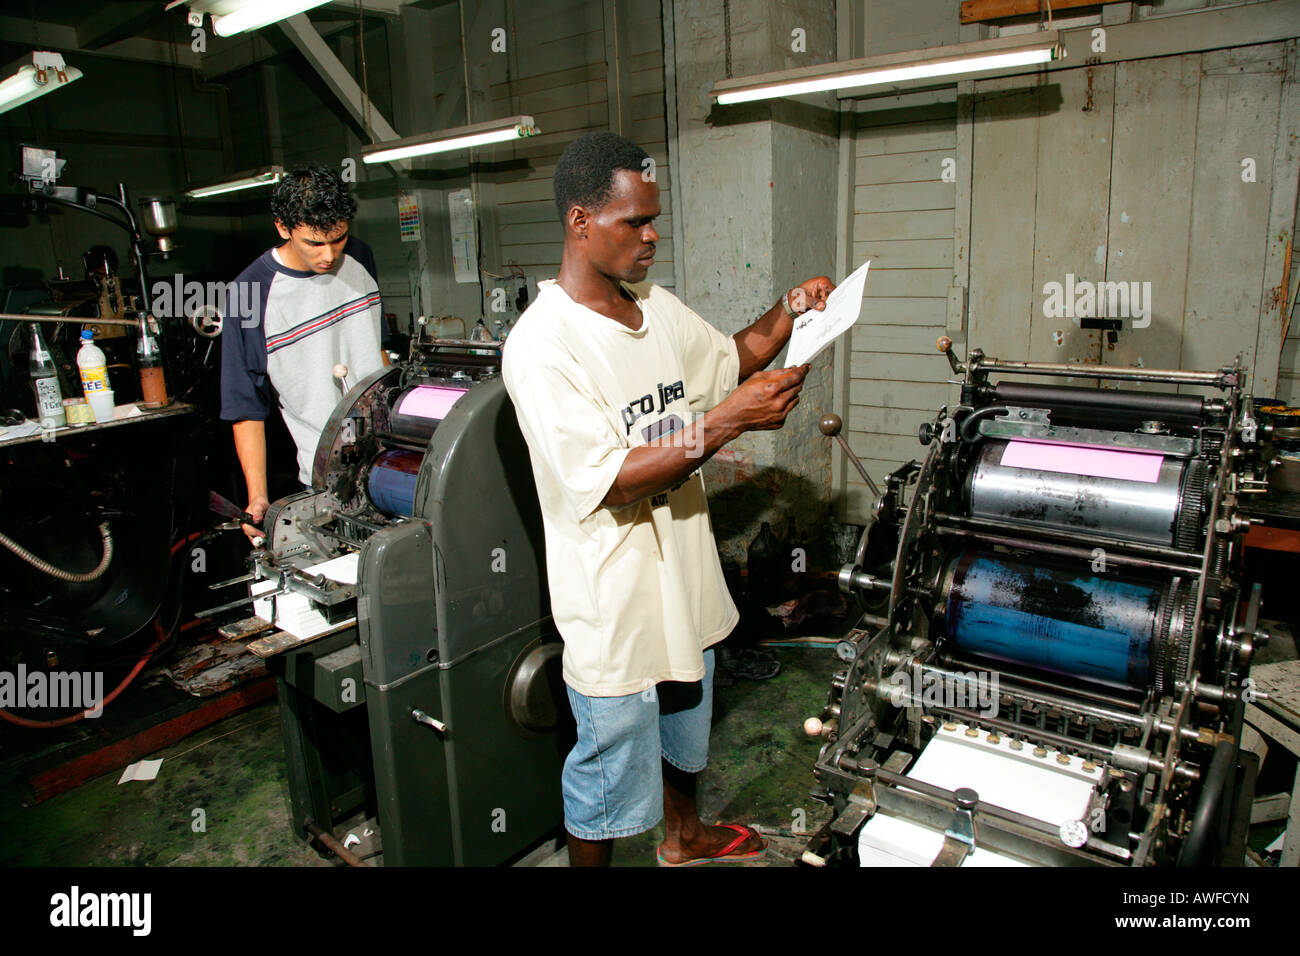 The Catholic Standard's printing office in Georgetown, Guyana, South America Stock Photo